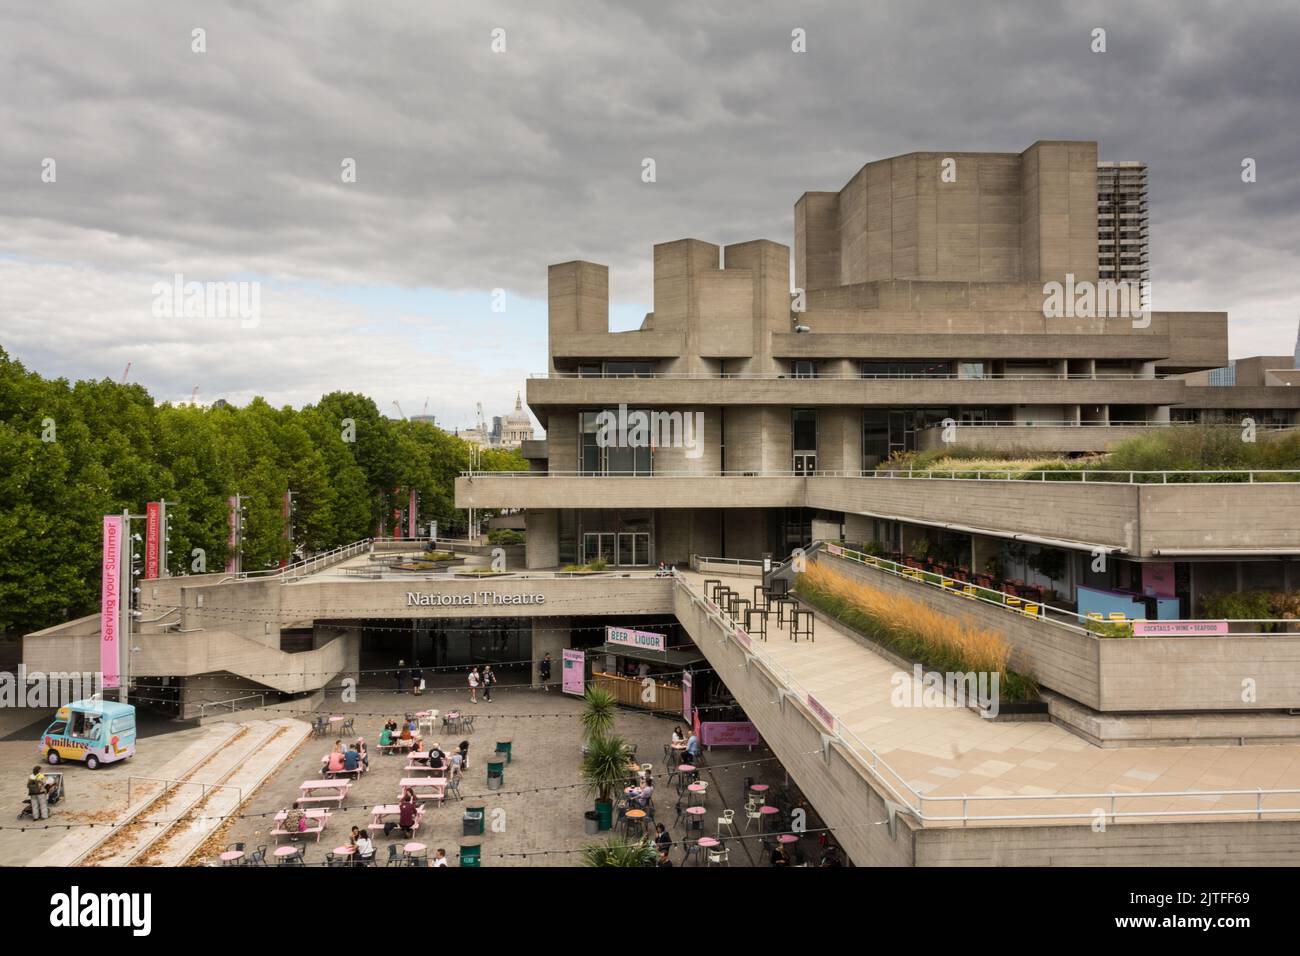 Denys Lasdun's National Theatre on London's South Bank, Upper Ground, Lambeth, Londres, SE1, ROYAUME-UNI, Banque D'Images